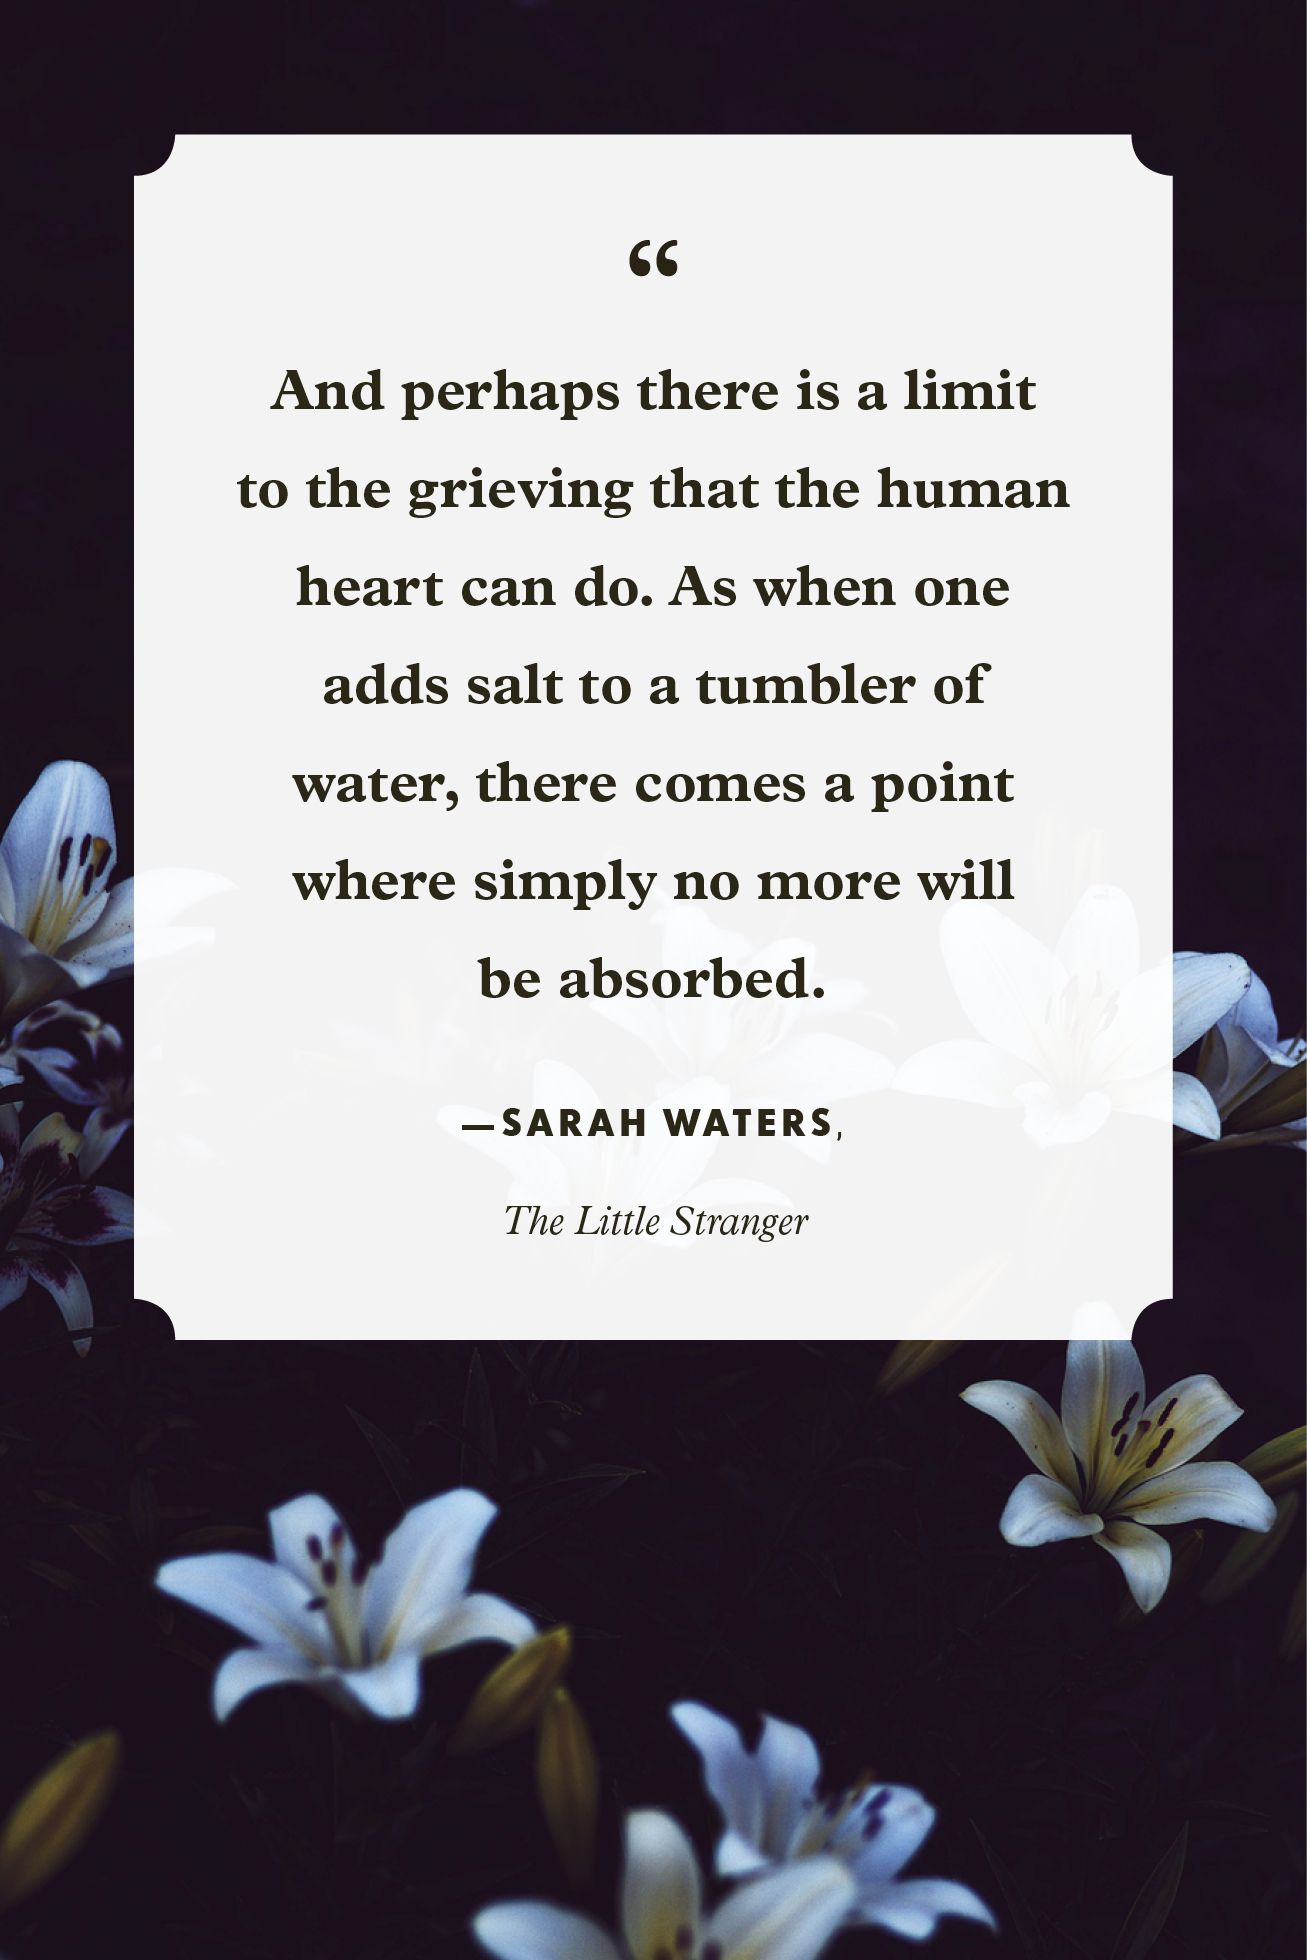 20 Best Grief Quotes - Inspirational Quotes to Help With Grief